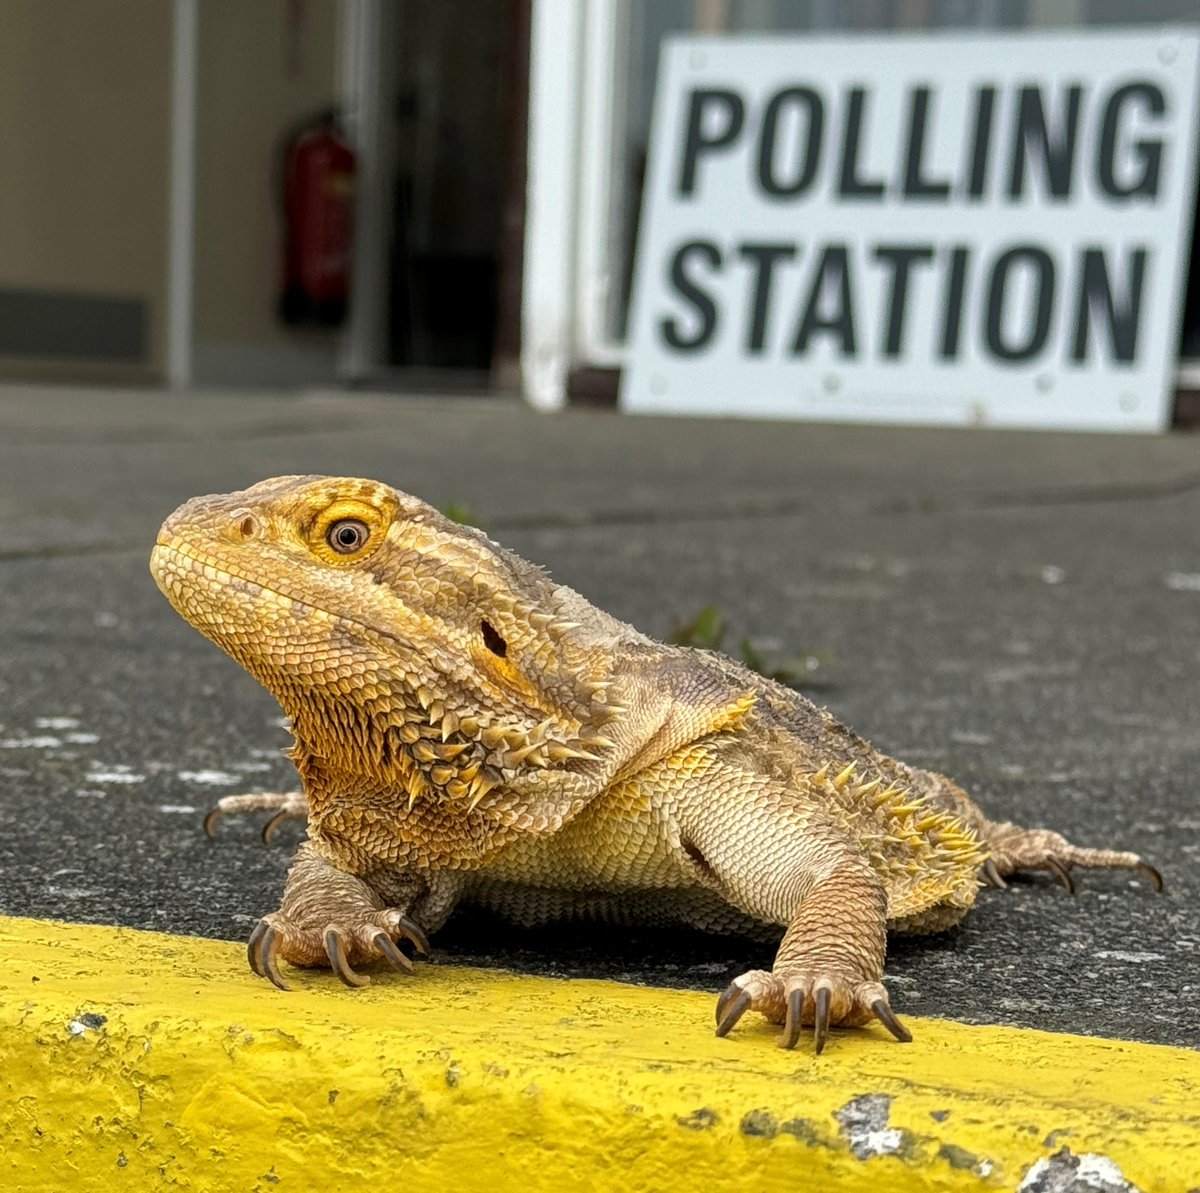 Henry the Bearded Dragon remembered his photo ID to vote in today's Police, Fire and Crime Commissioner election... make sure you do too! #LizardsAtPollingStations #PetsAtPollingStations